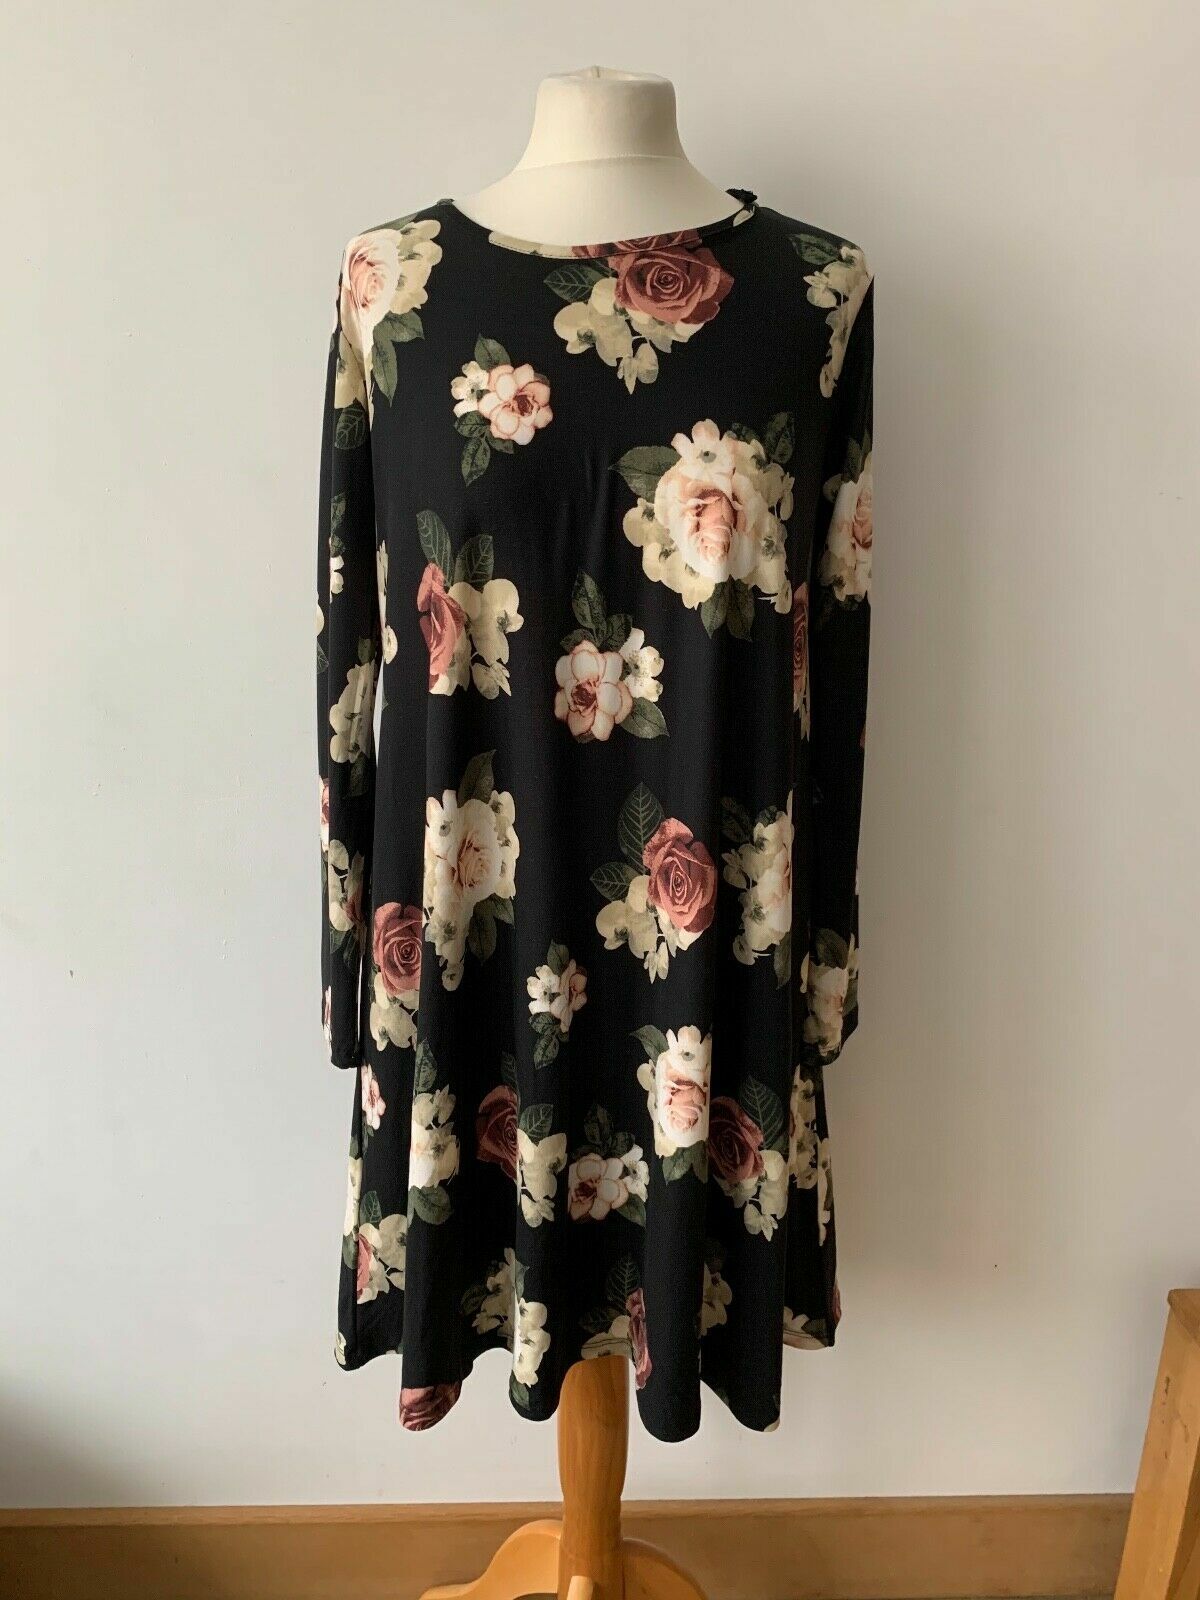 Floral Long Sleeve Swing Dress Pit to Pit 21.5"